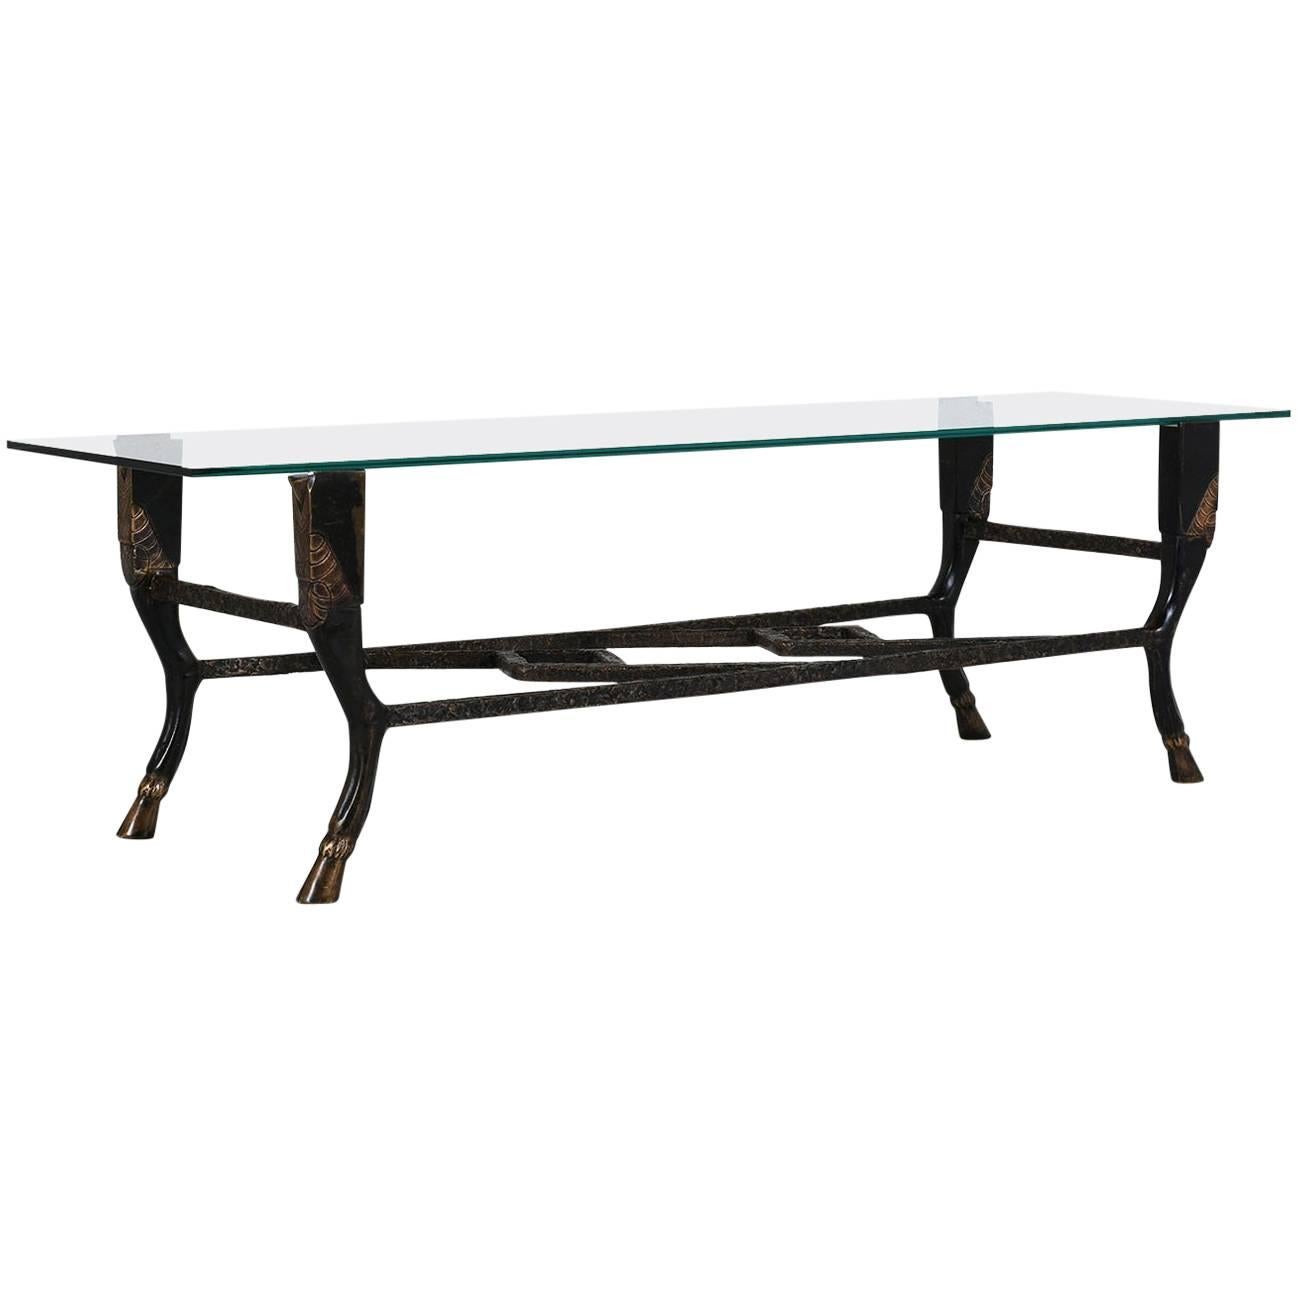 Christopher Chodoff Bronze and Glass Coffee Table